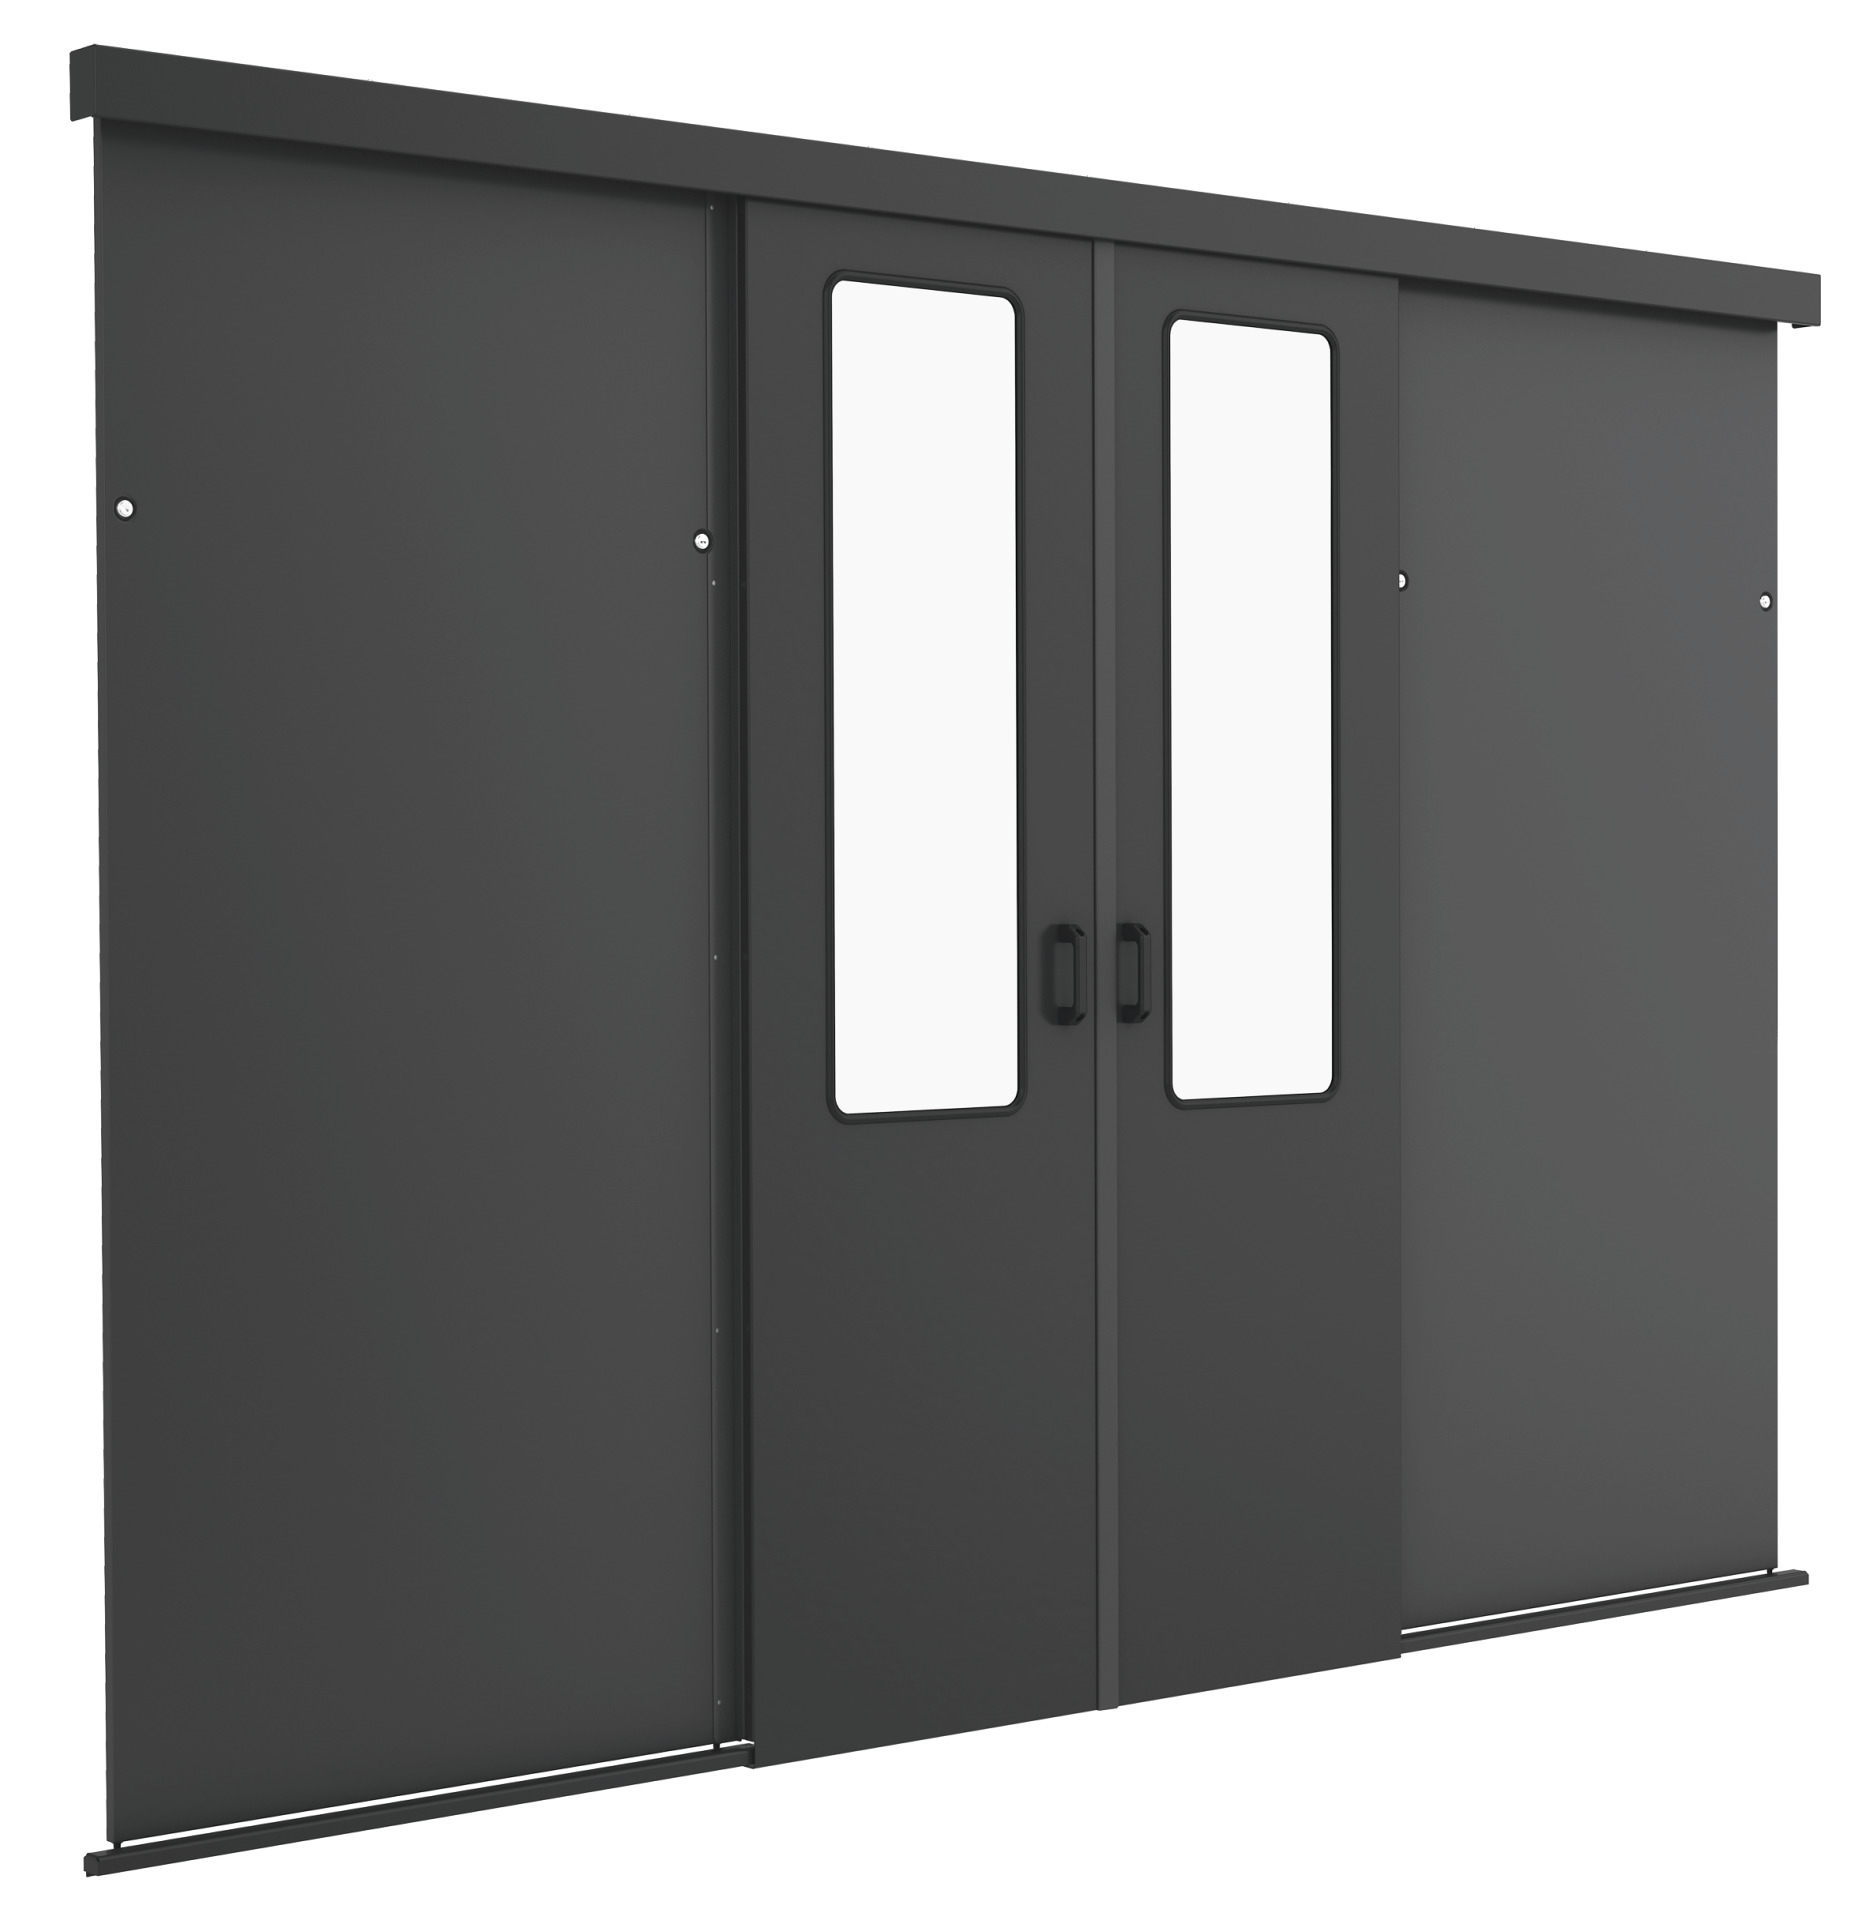 Slidiung Door for Cold/Warm Aisle for PRO 42U, 1200 mm, RAL9005